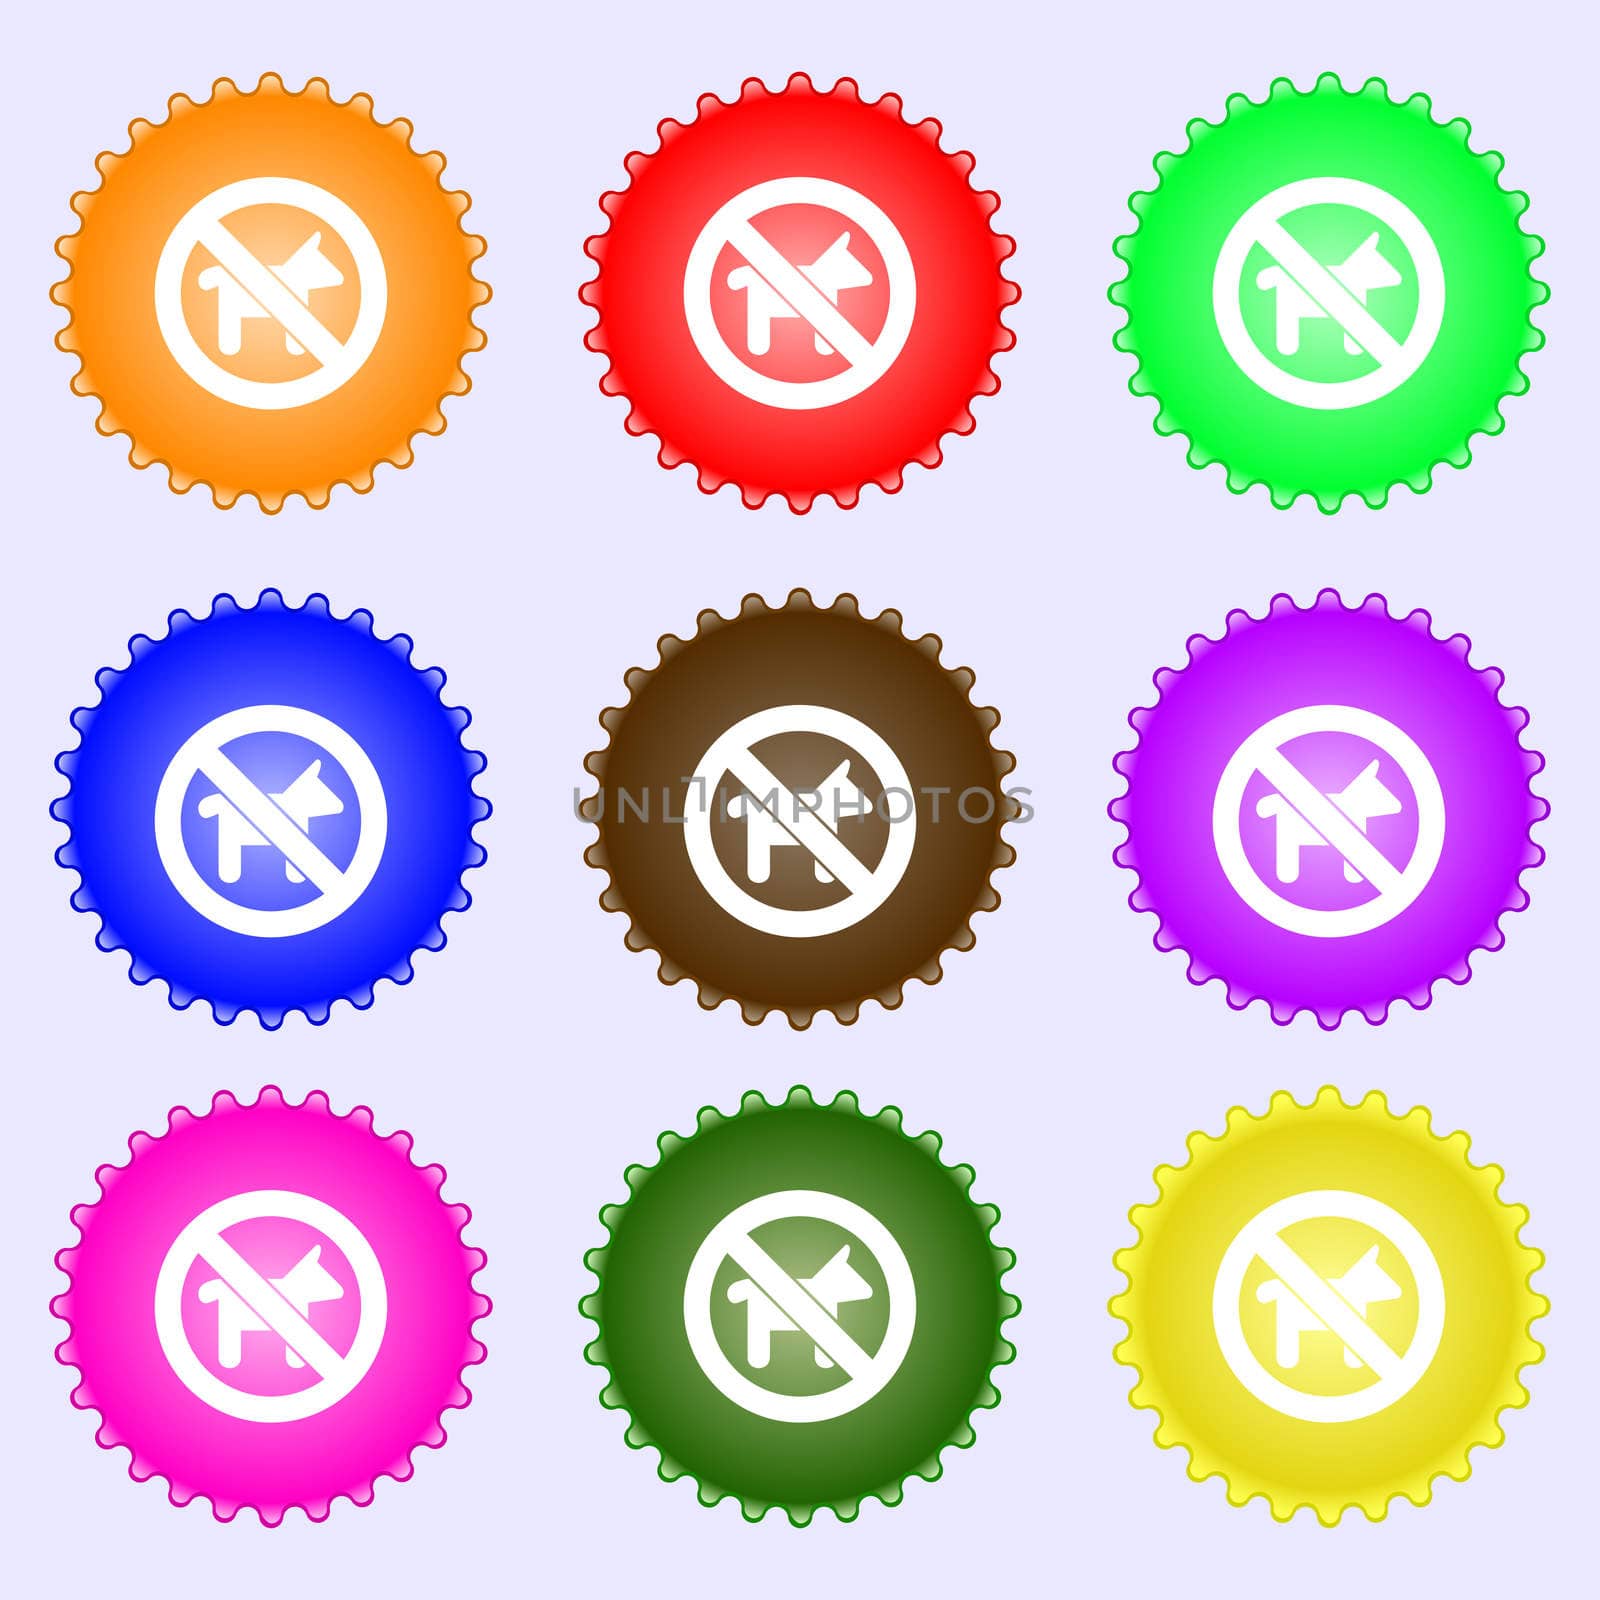 dog walking is prohibited icon sign. A set of nine different colored labels. illustration